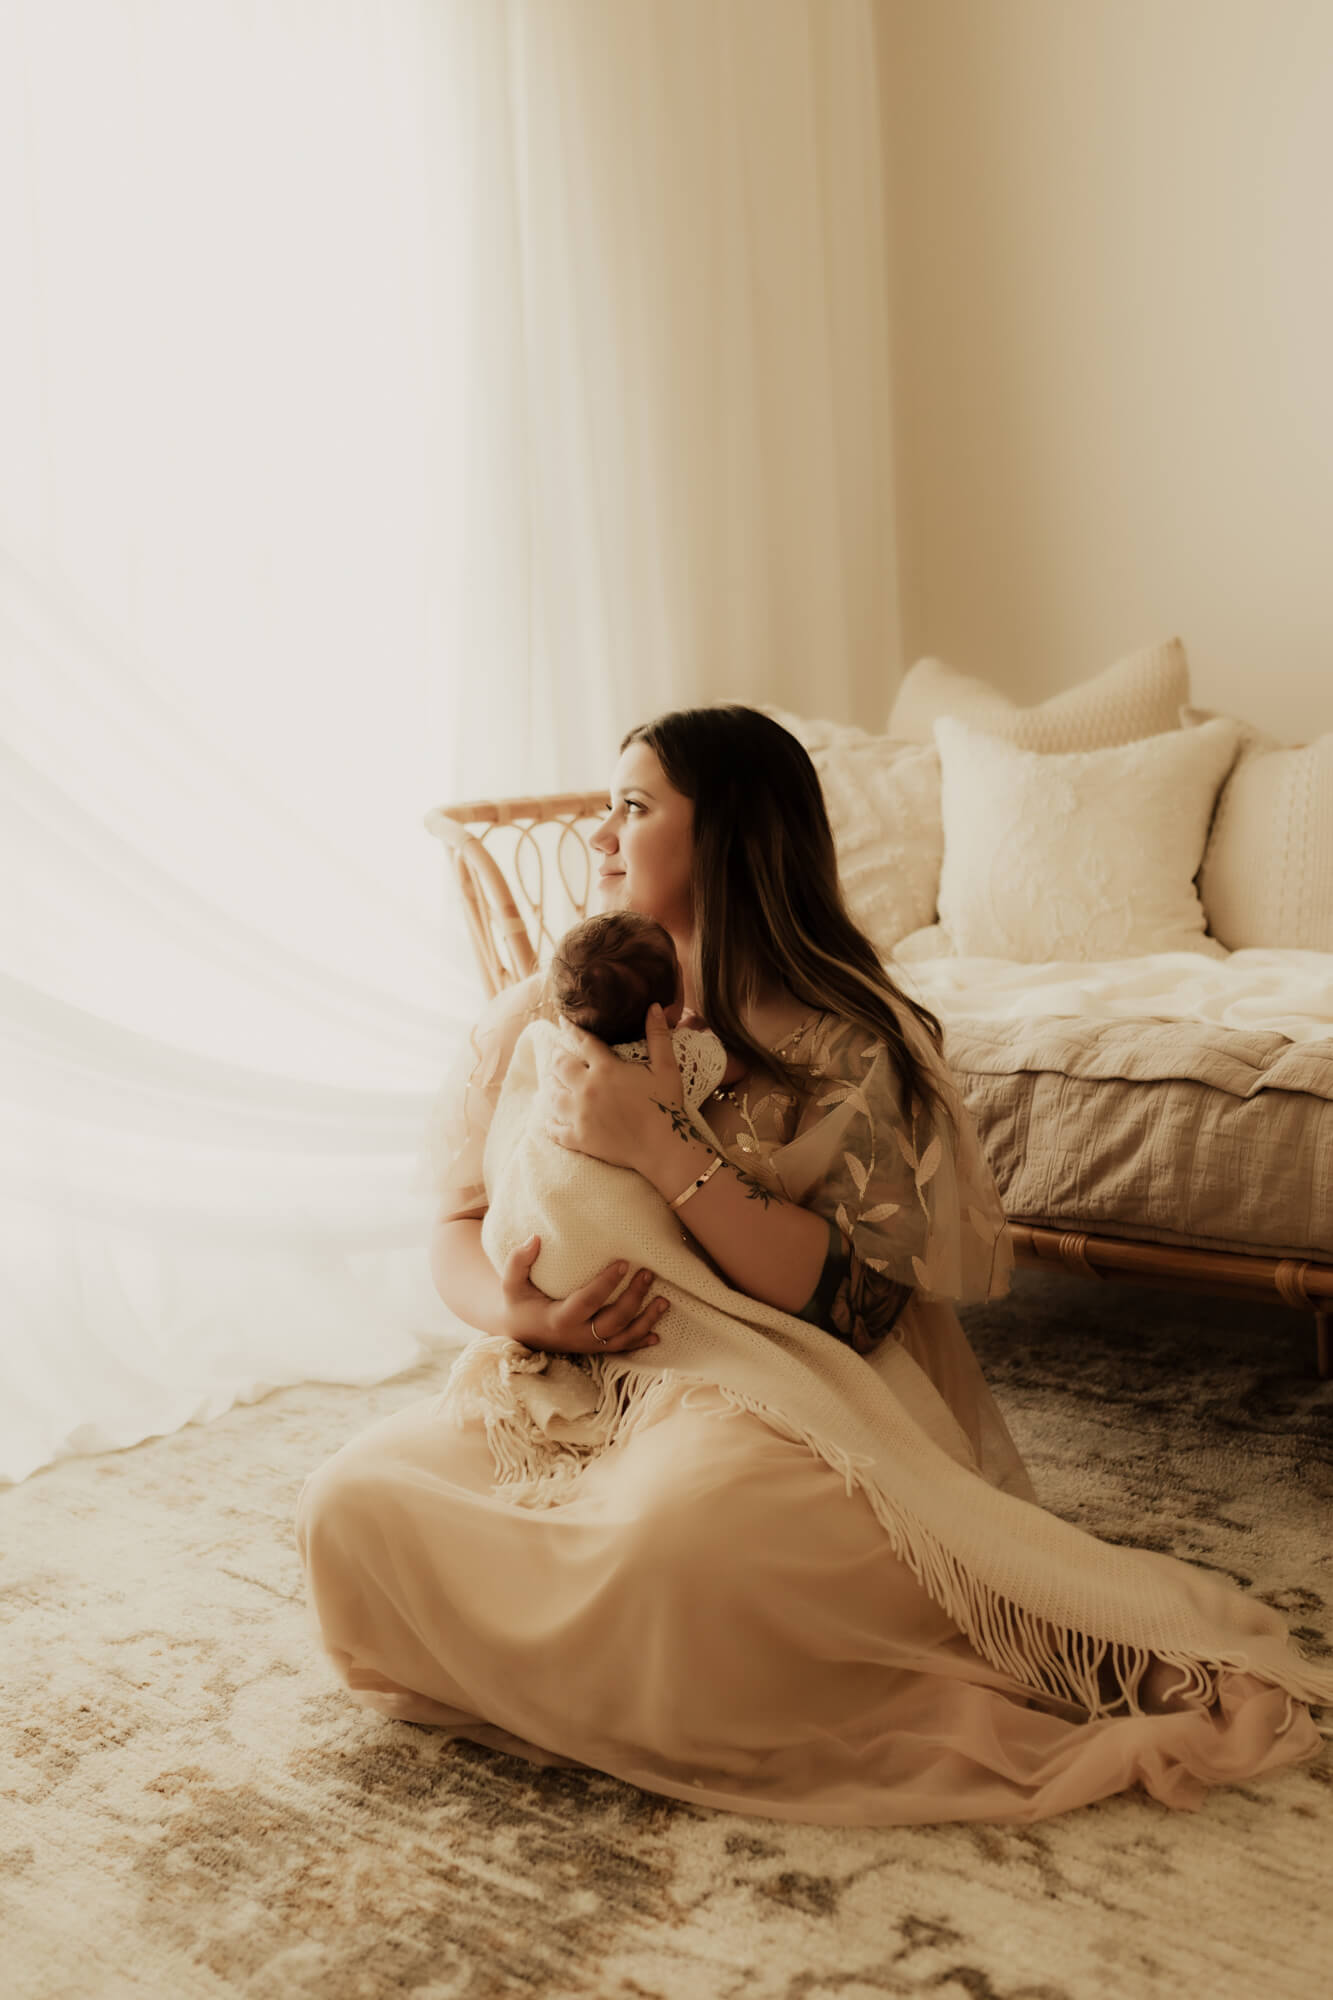 A new mom sits on the floor on a rug in front of a wicker couch by a window holding her newborn baby interior designer okc